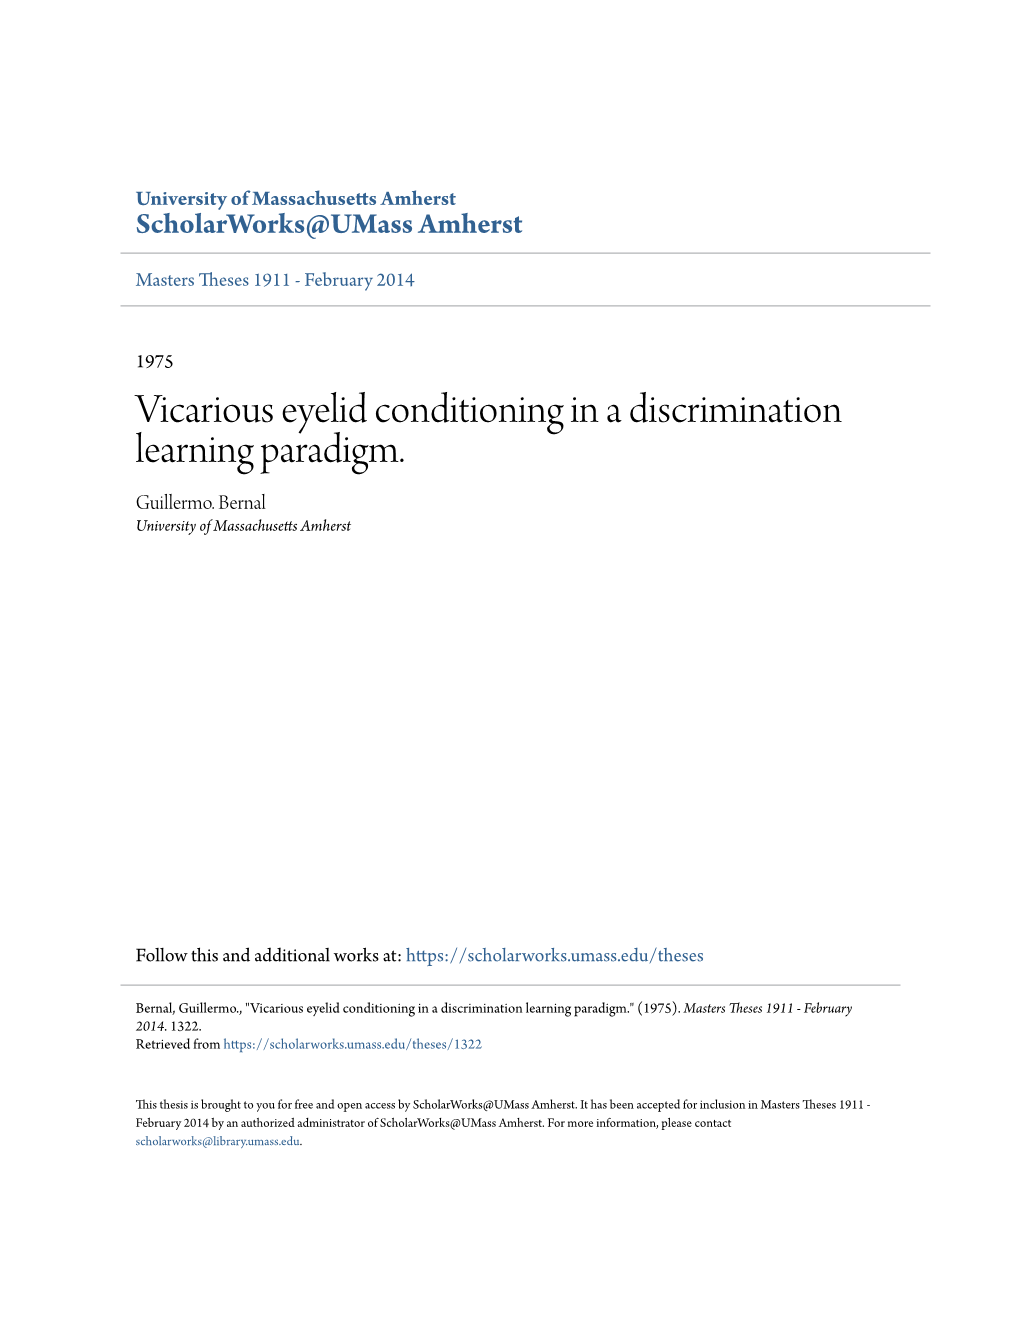 Vicarious Eyelid Conditioning in a Discrimination Learning Paradigm. Guillermo